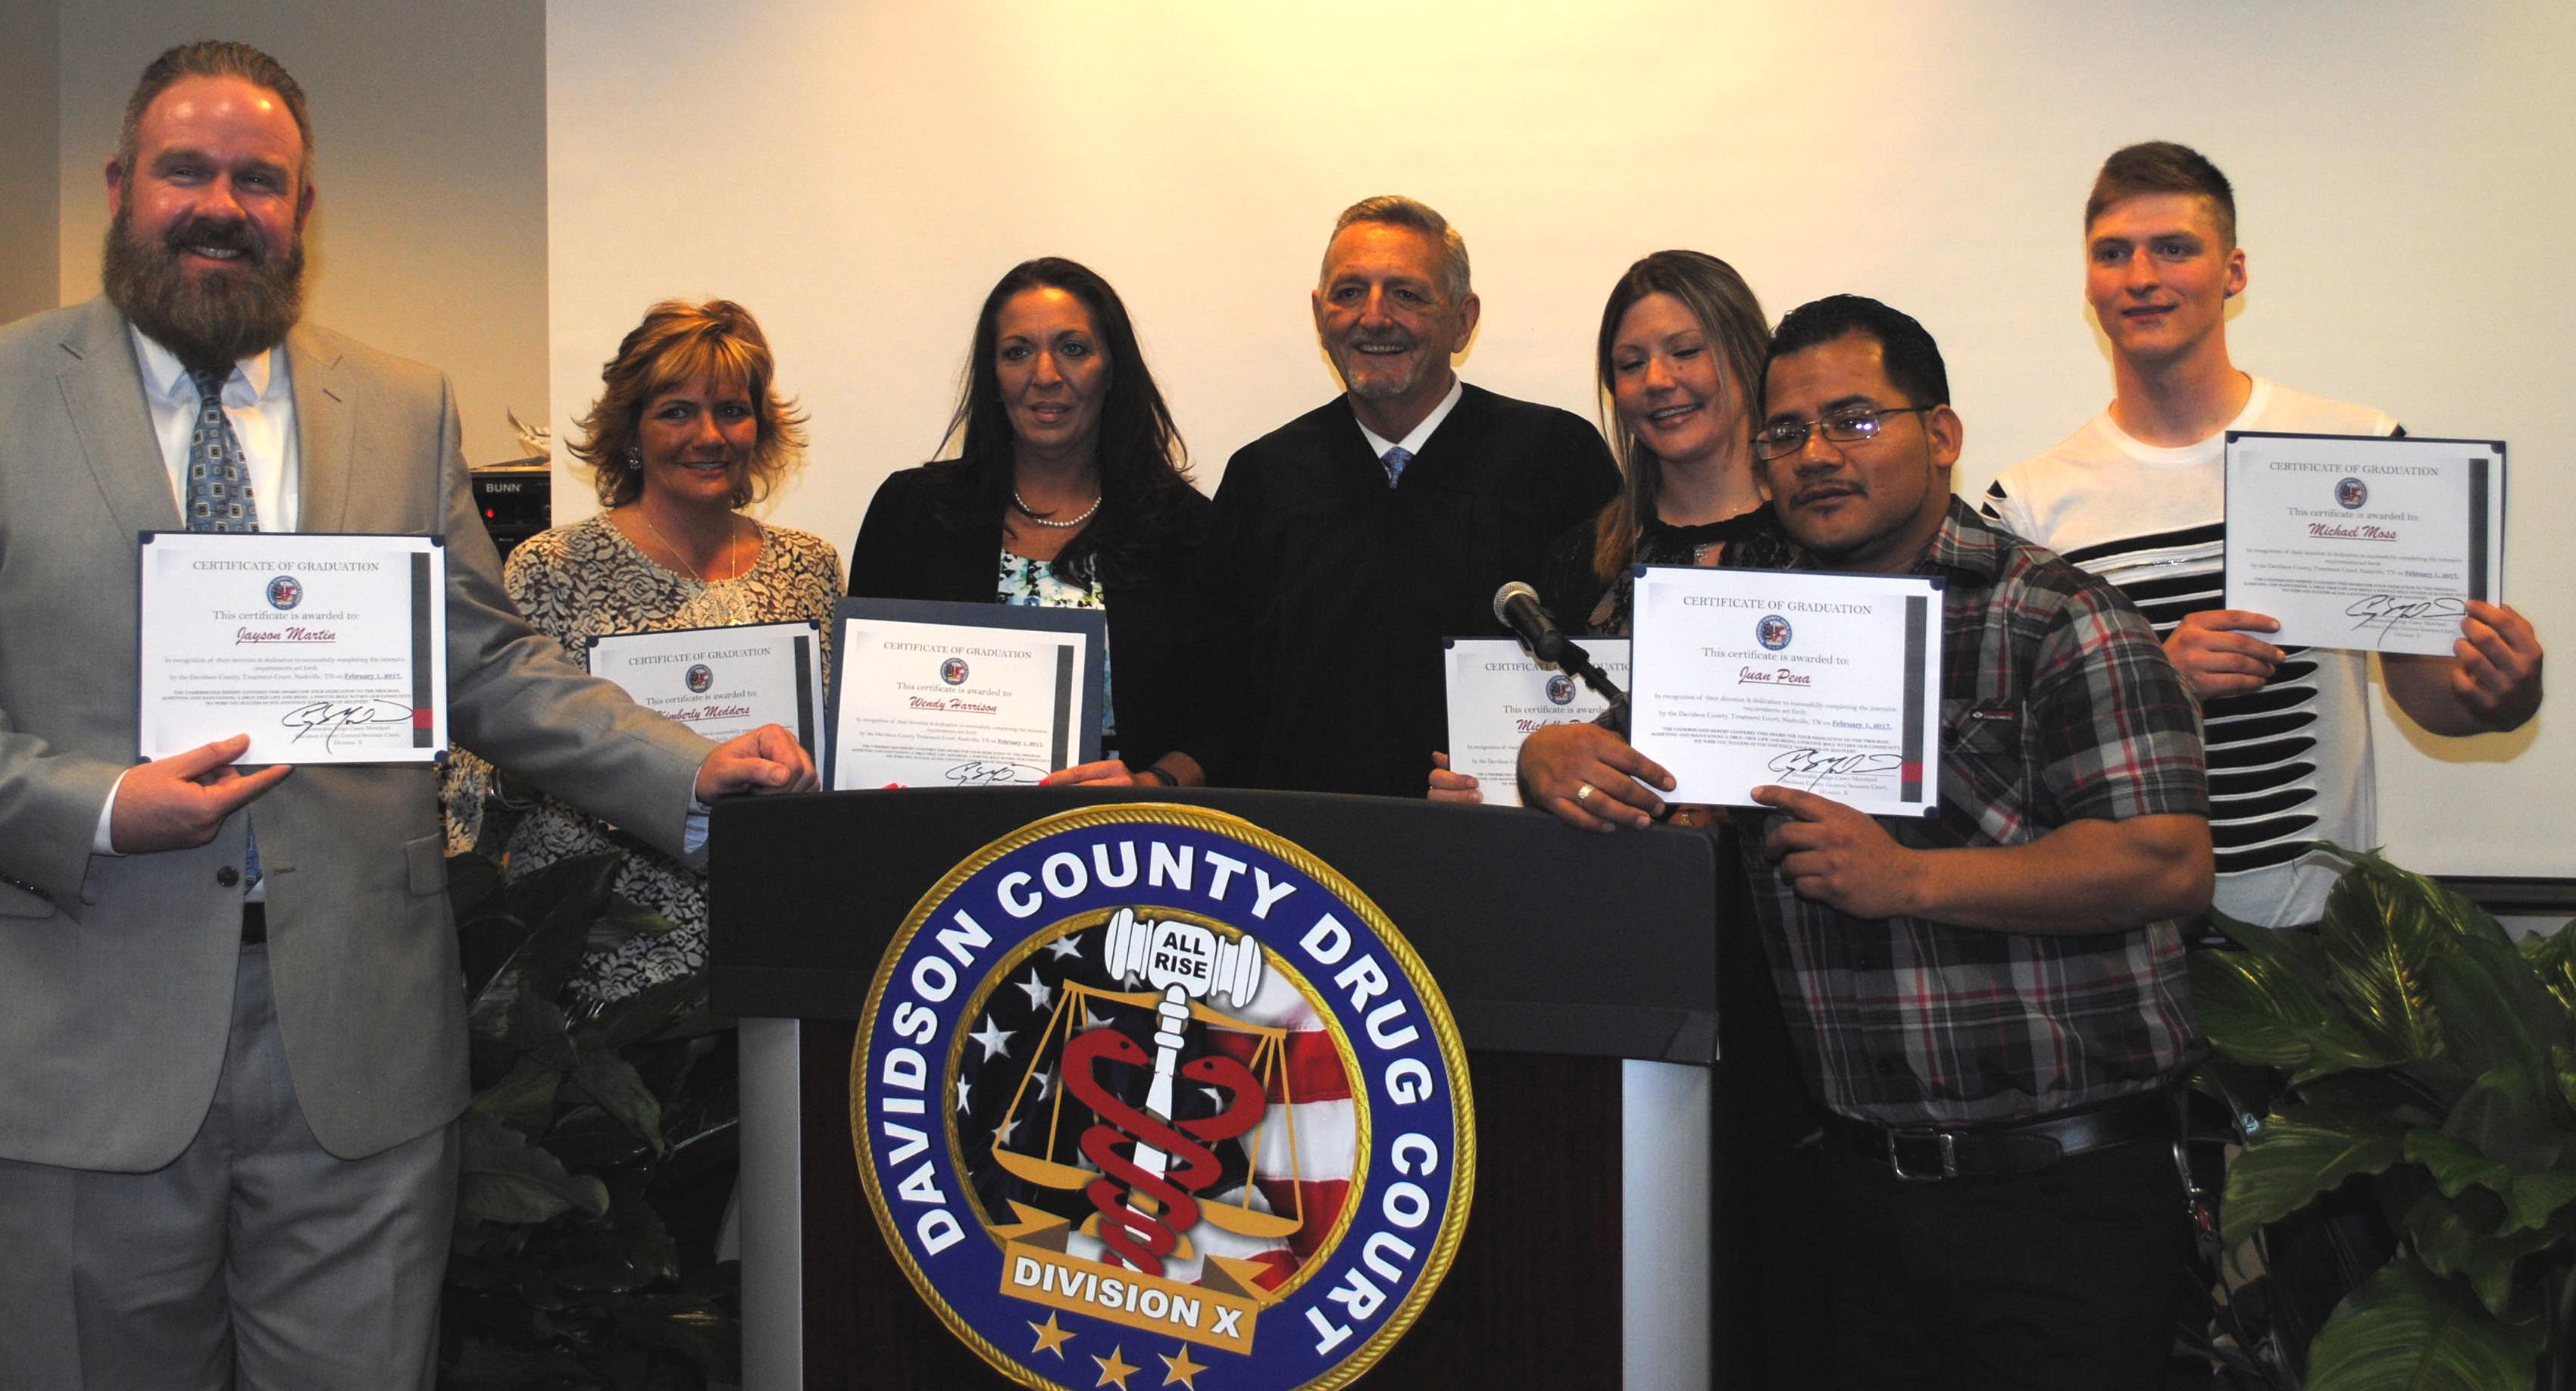 Judge Casey Moreland, along with the Davidson County Drug Court graduates.(From left to right): Jayson Martin, Kimberly Medders, Wendy Harrison, Judge Moreland, Michelle Patrick, Juan Pena and Michael Moss